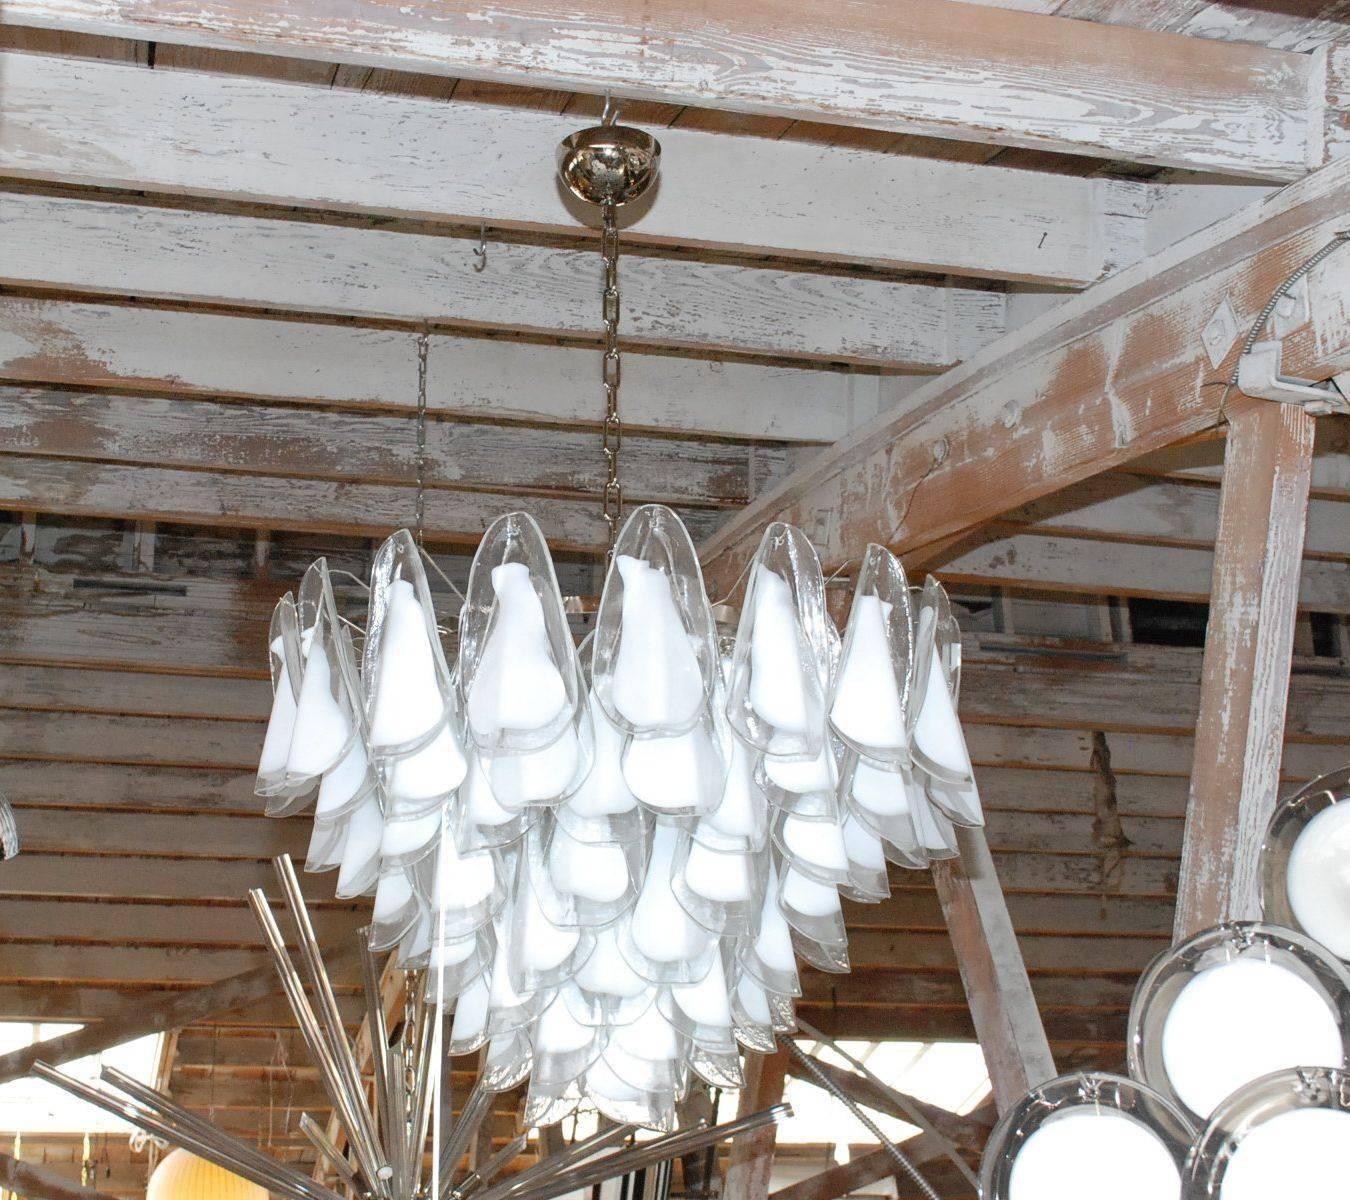 Vintage Italian chandeliers with milky white Murano glass petals, mounted on nickel frames / Designed by Vistosi circa 1960’s / Made in Italy
13 lights / E26 or E27 type / max 60W each
Diameter: 32 inches / Height: 22 inches plus chain and canopy
2